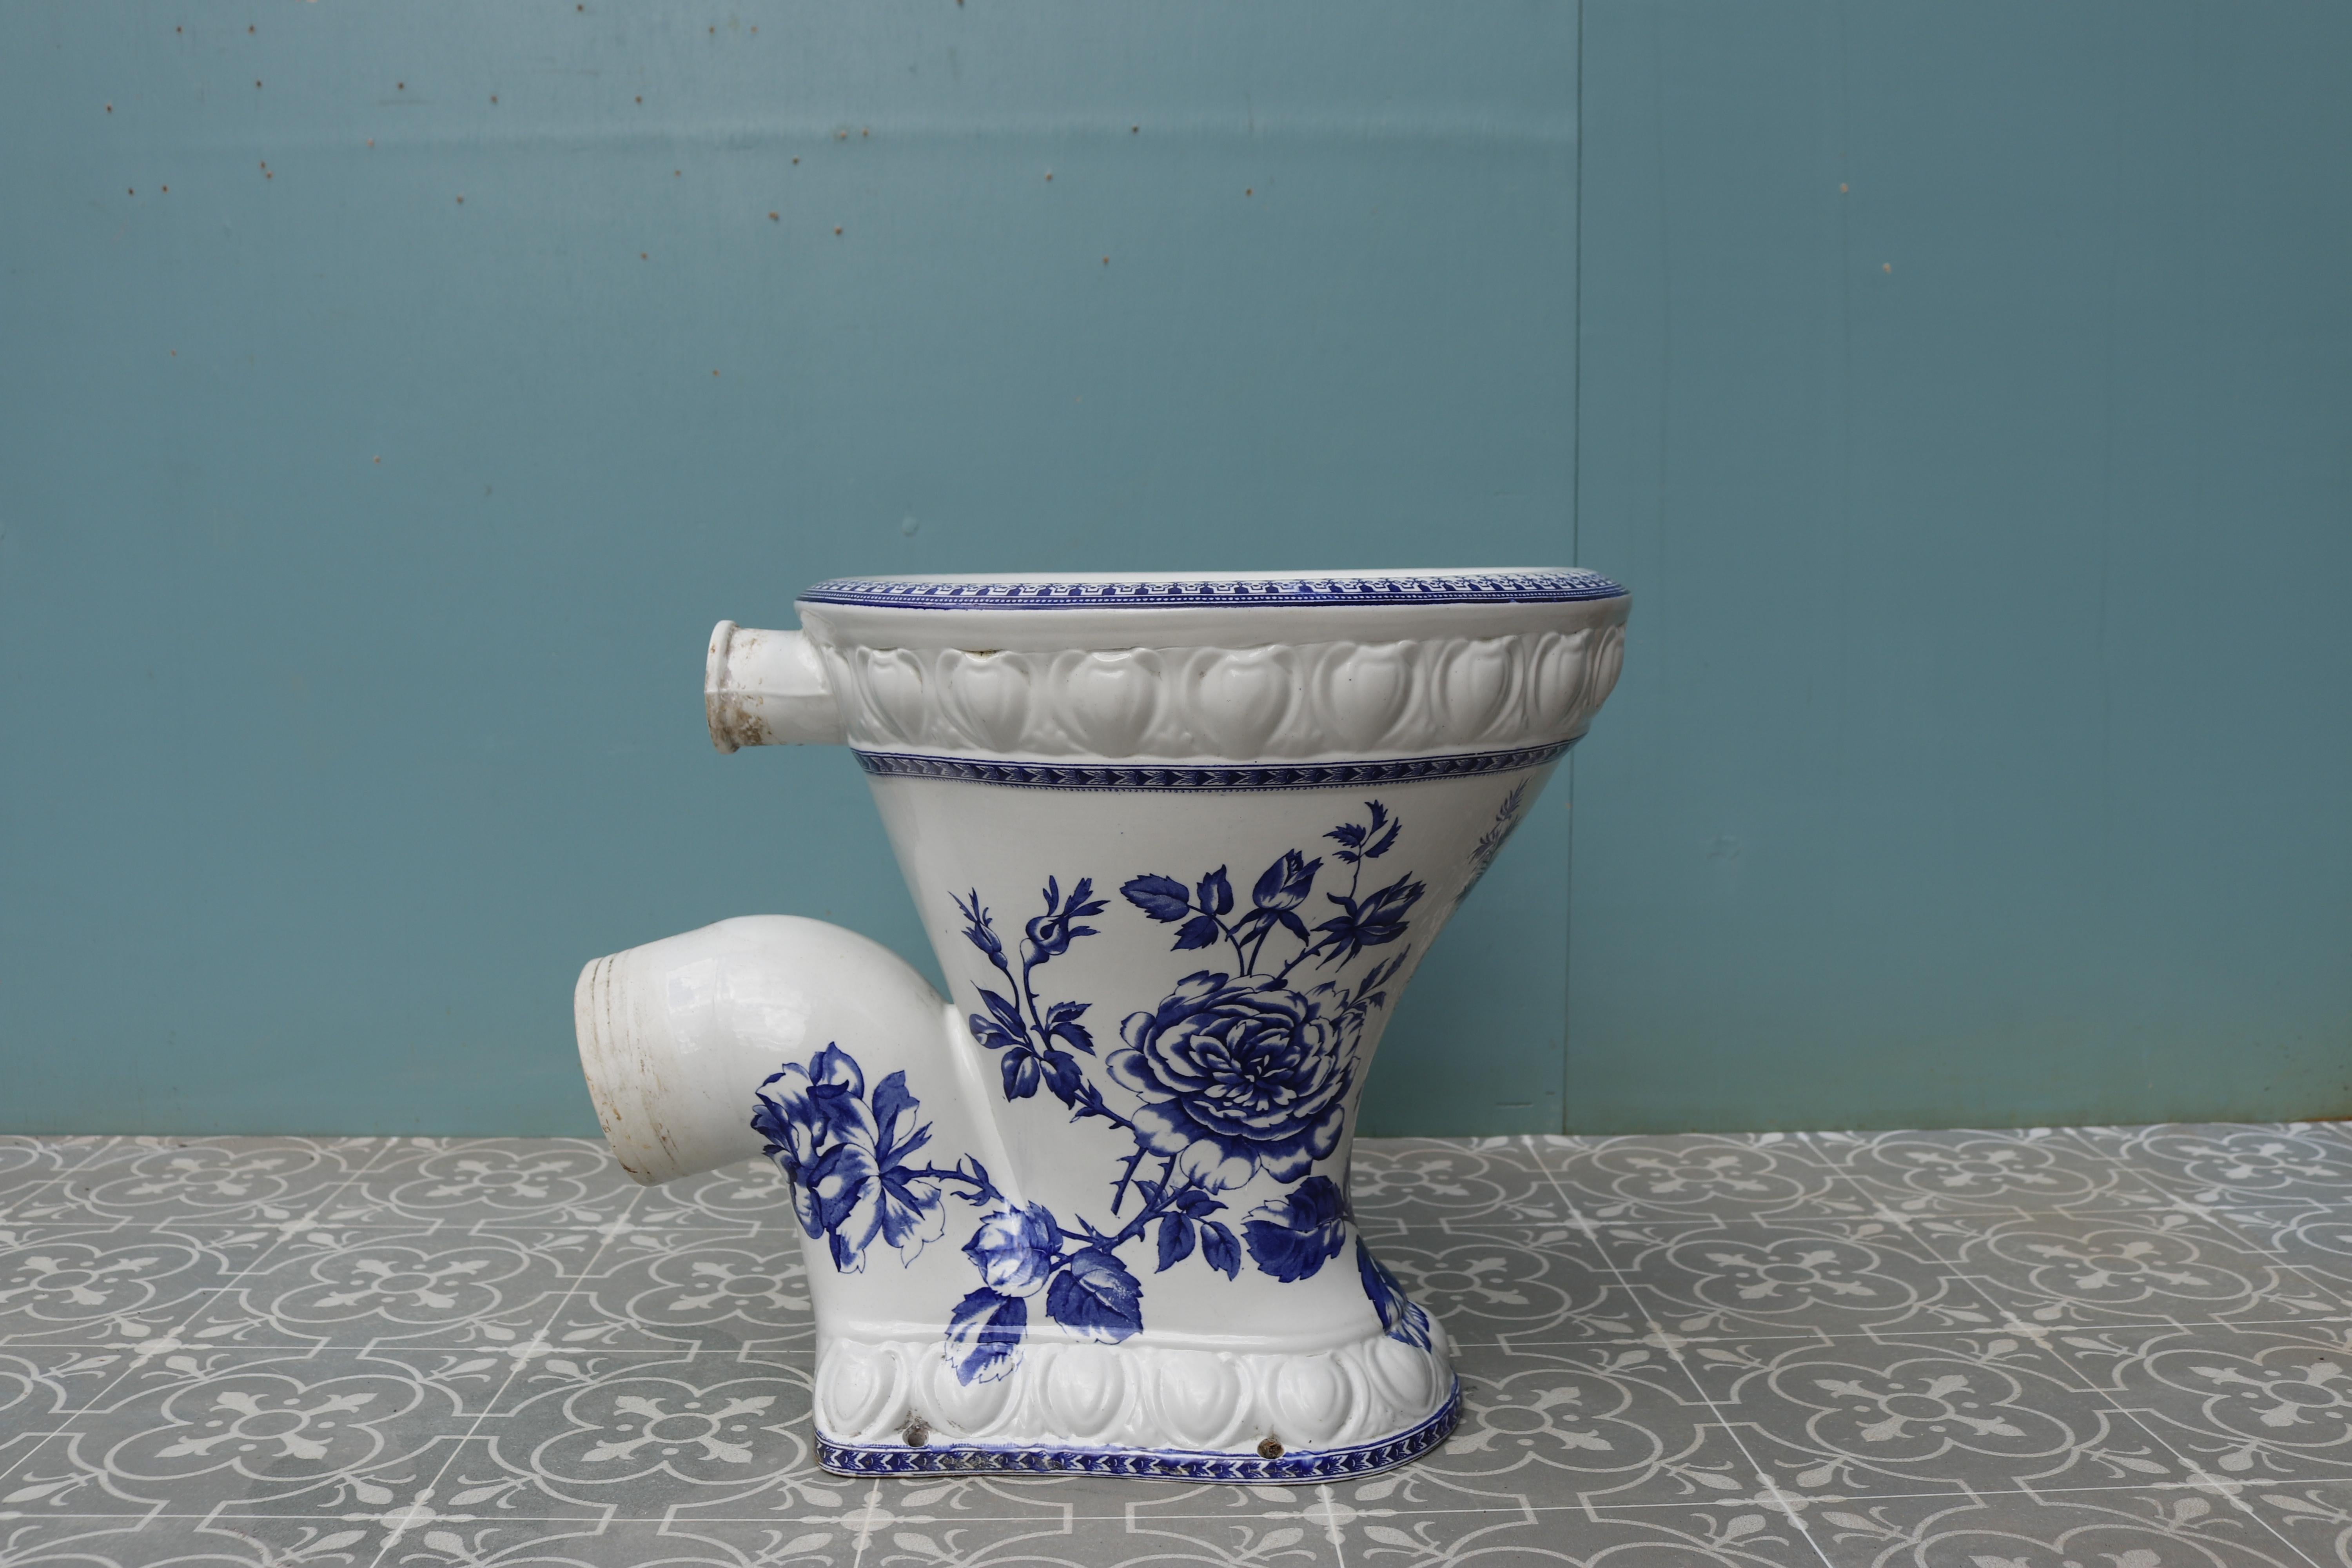 19th Century Antique Victorian Patterned Toilet ‘the City' For Sale